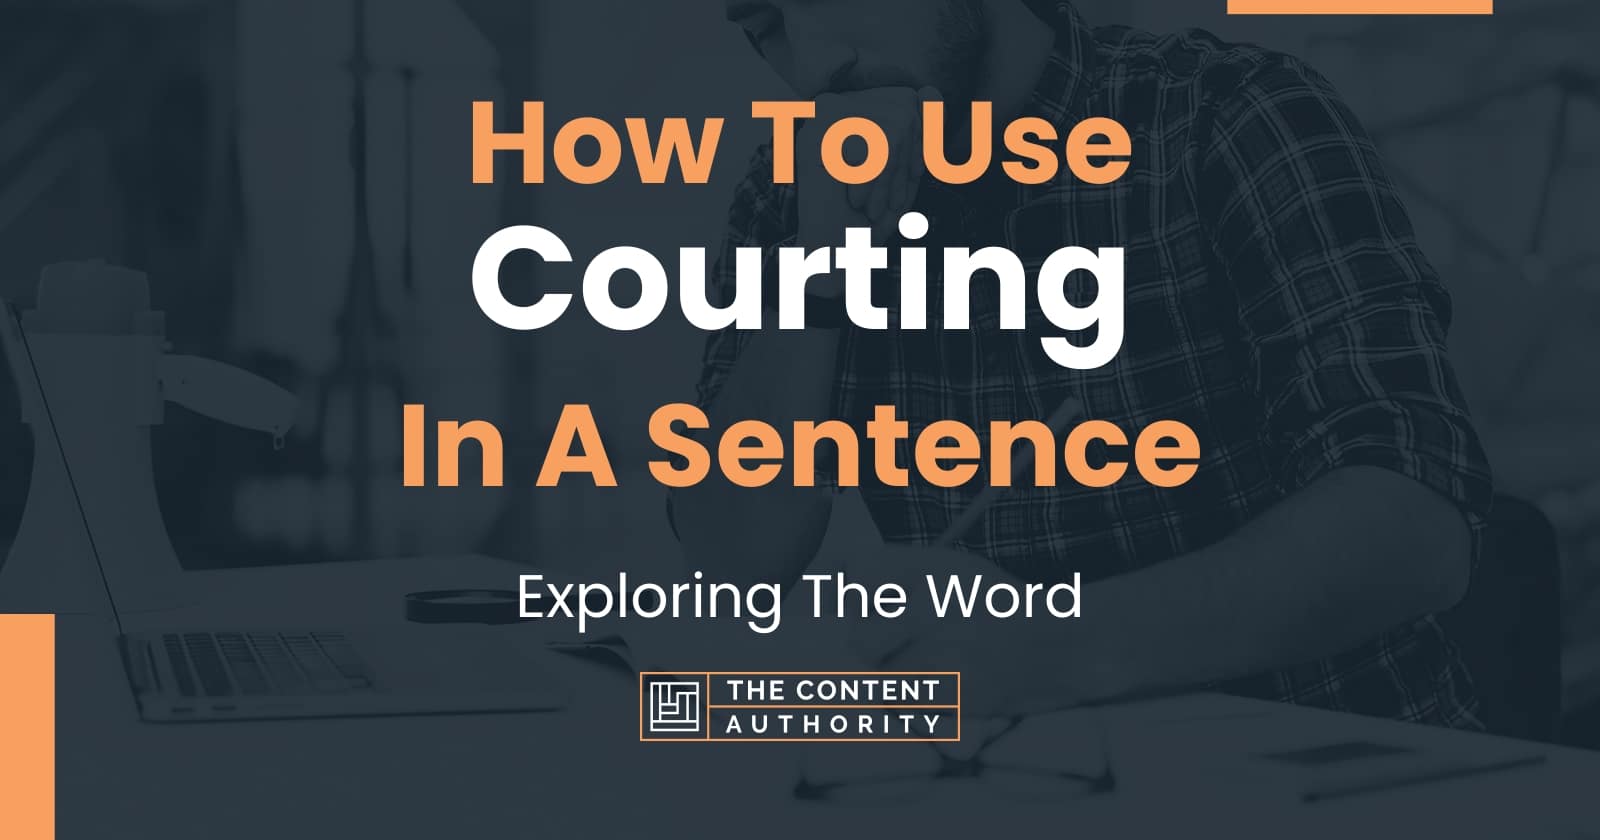 How To Use Courting In A Sentence: Exploring The Word